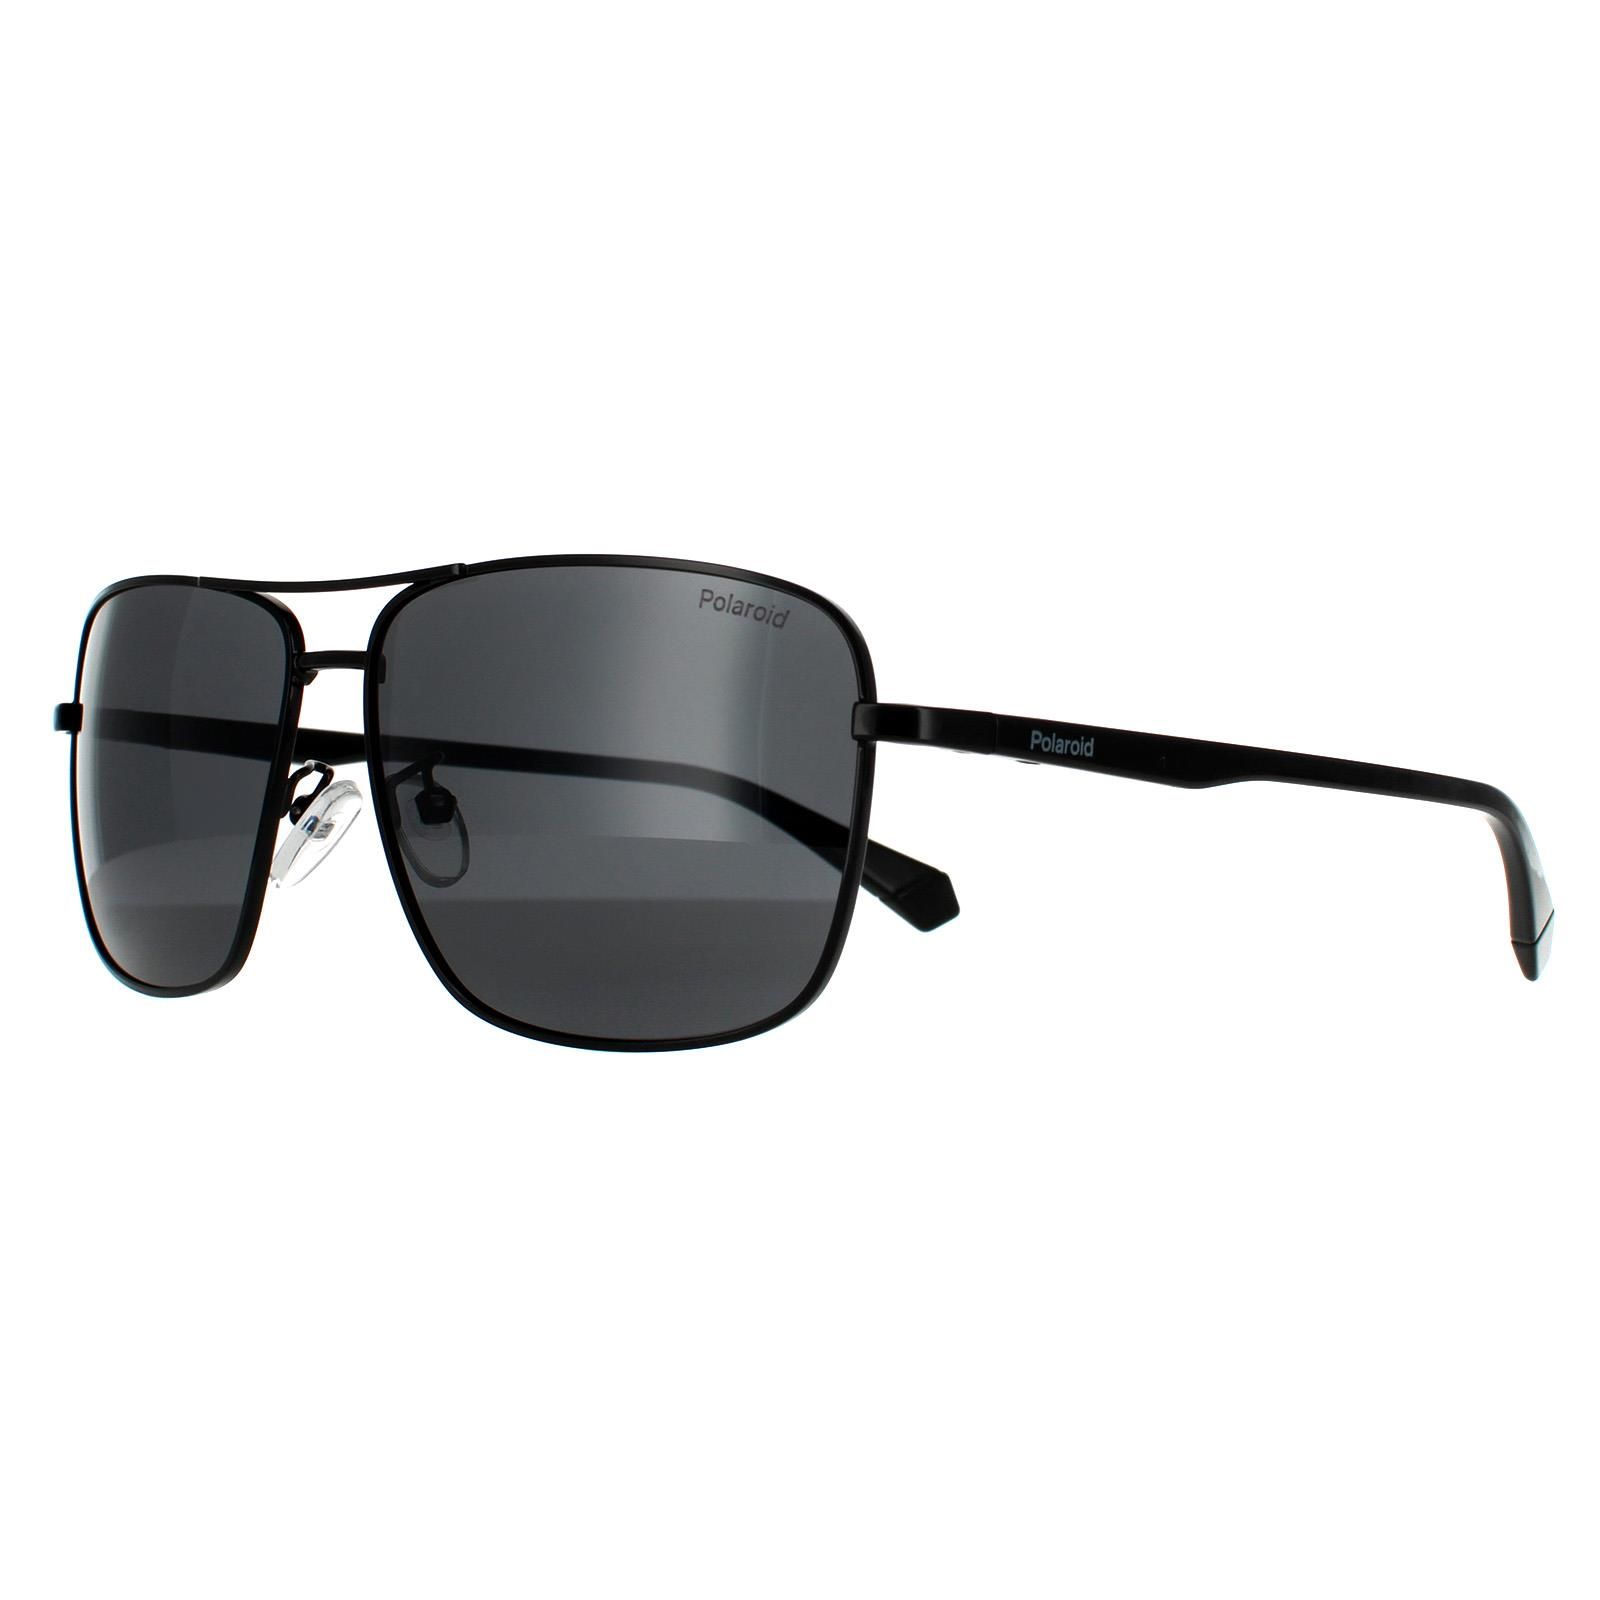 Polaroid Rectangle Mens Black Grey Polarized 90041091 Polaroid are a rectangle style crafted from lightweight metal. The design features a double bridge, adjustable nose pads and Polaroid's logo on the temples. Finished with superb polarized lenses which guarantee a glare free wear for all day comfort.